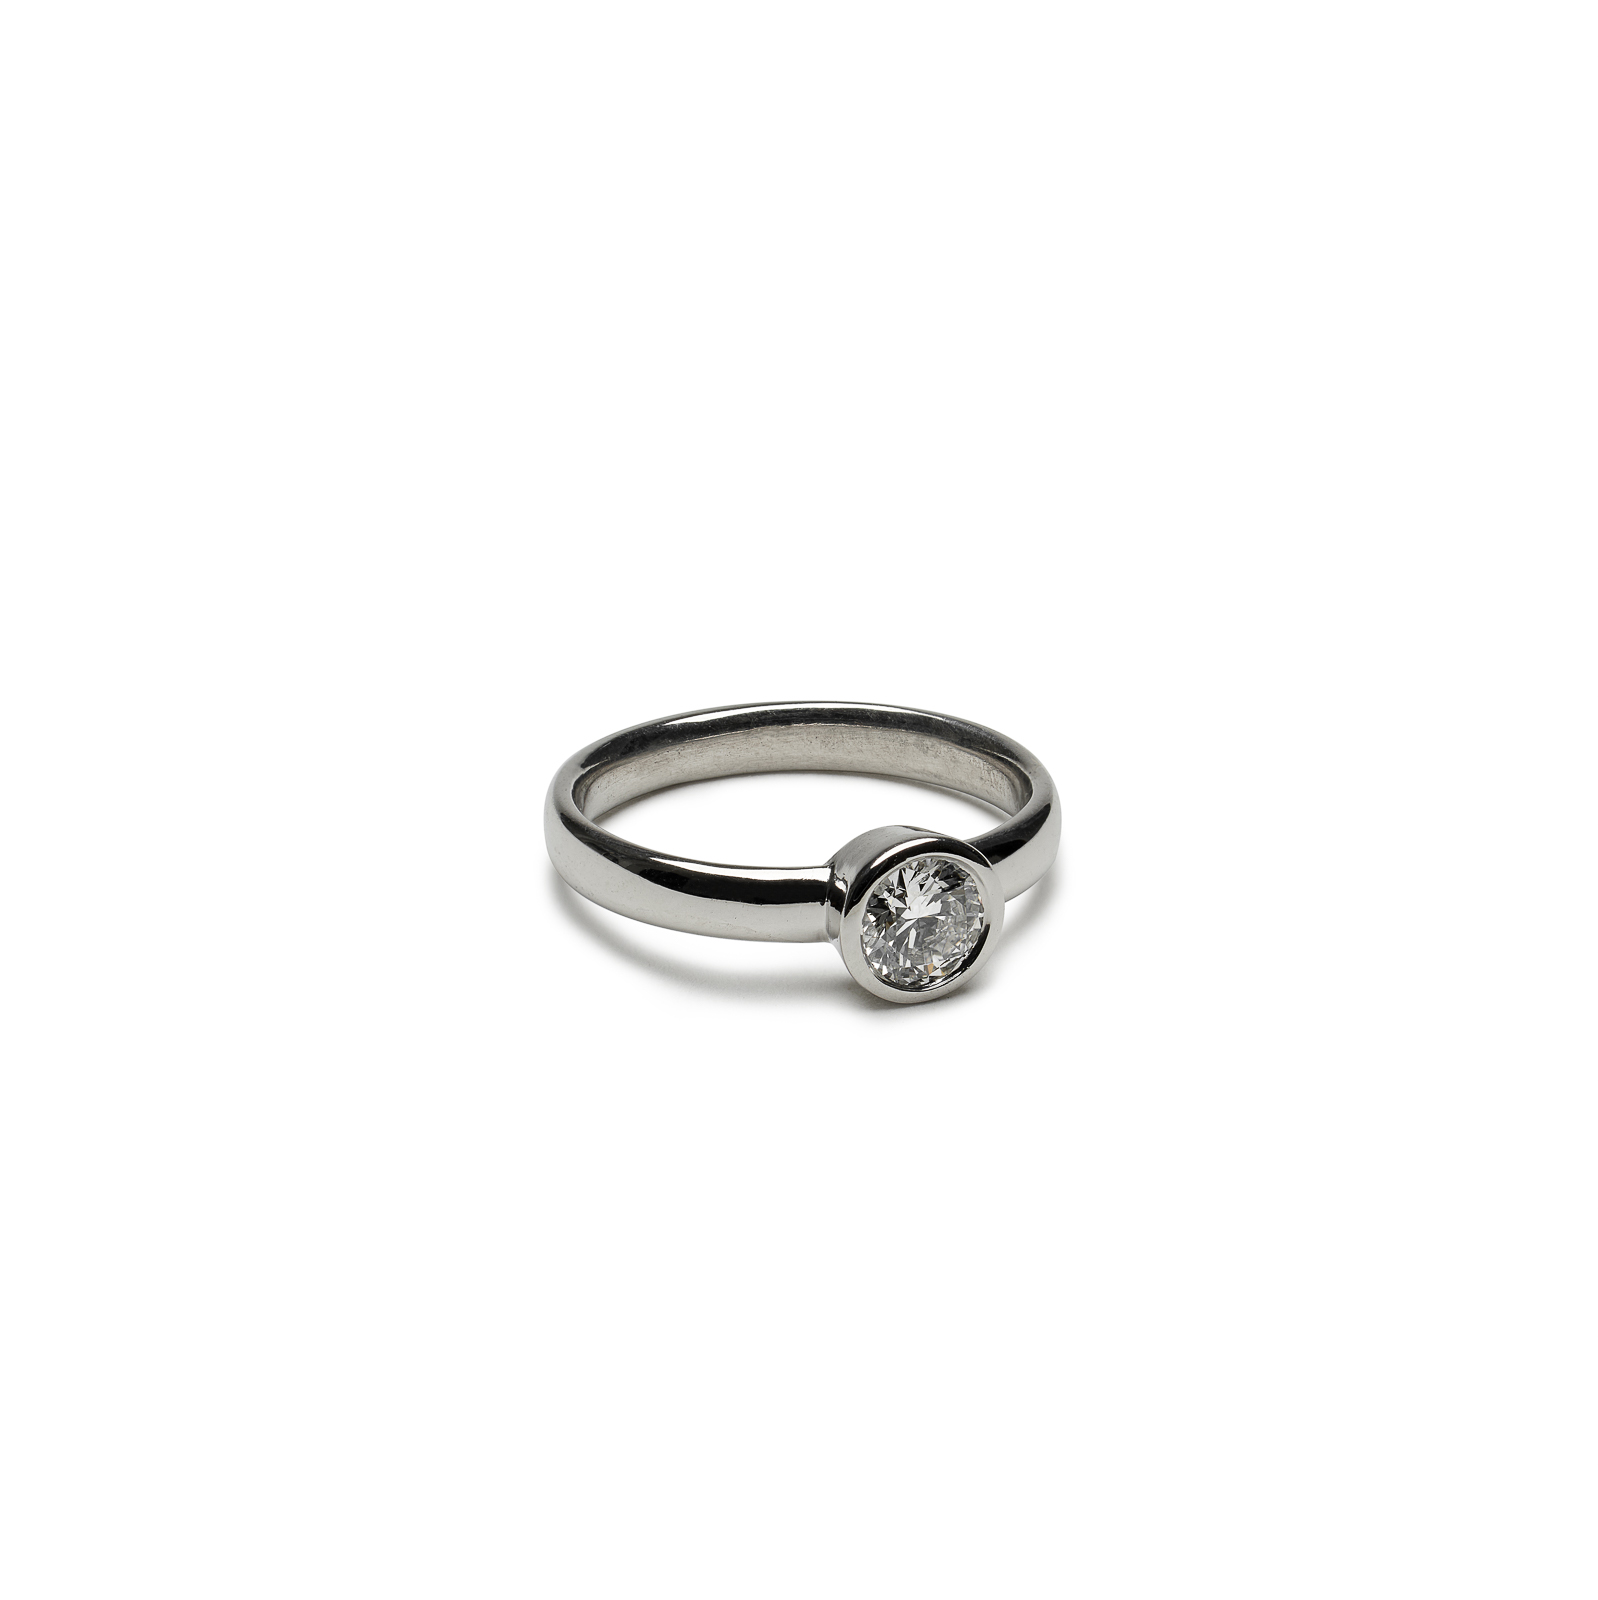 Simple sterling silver ring with bezel set diamond